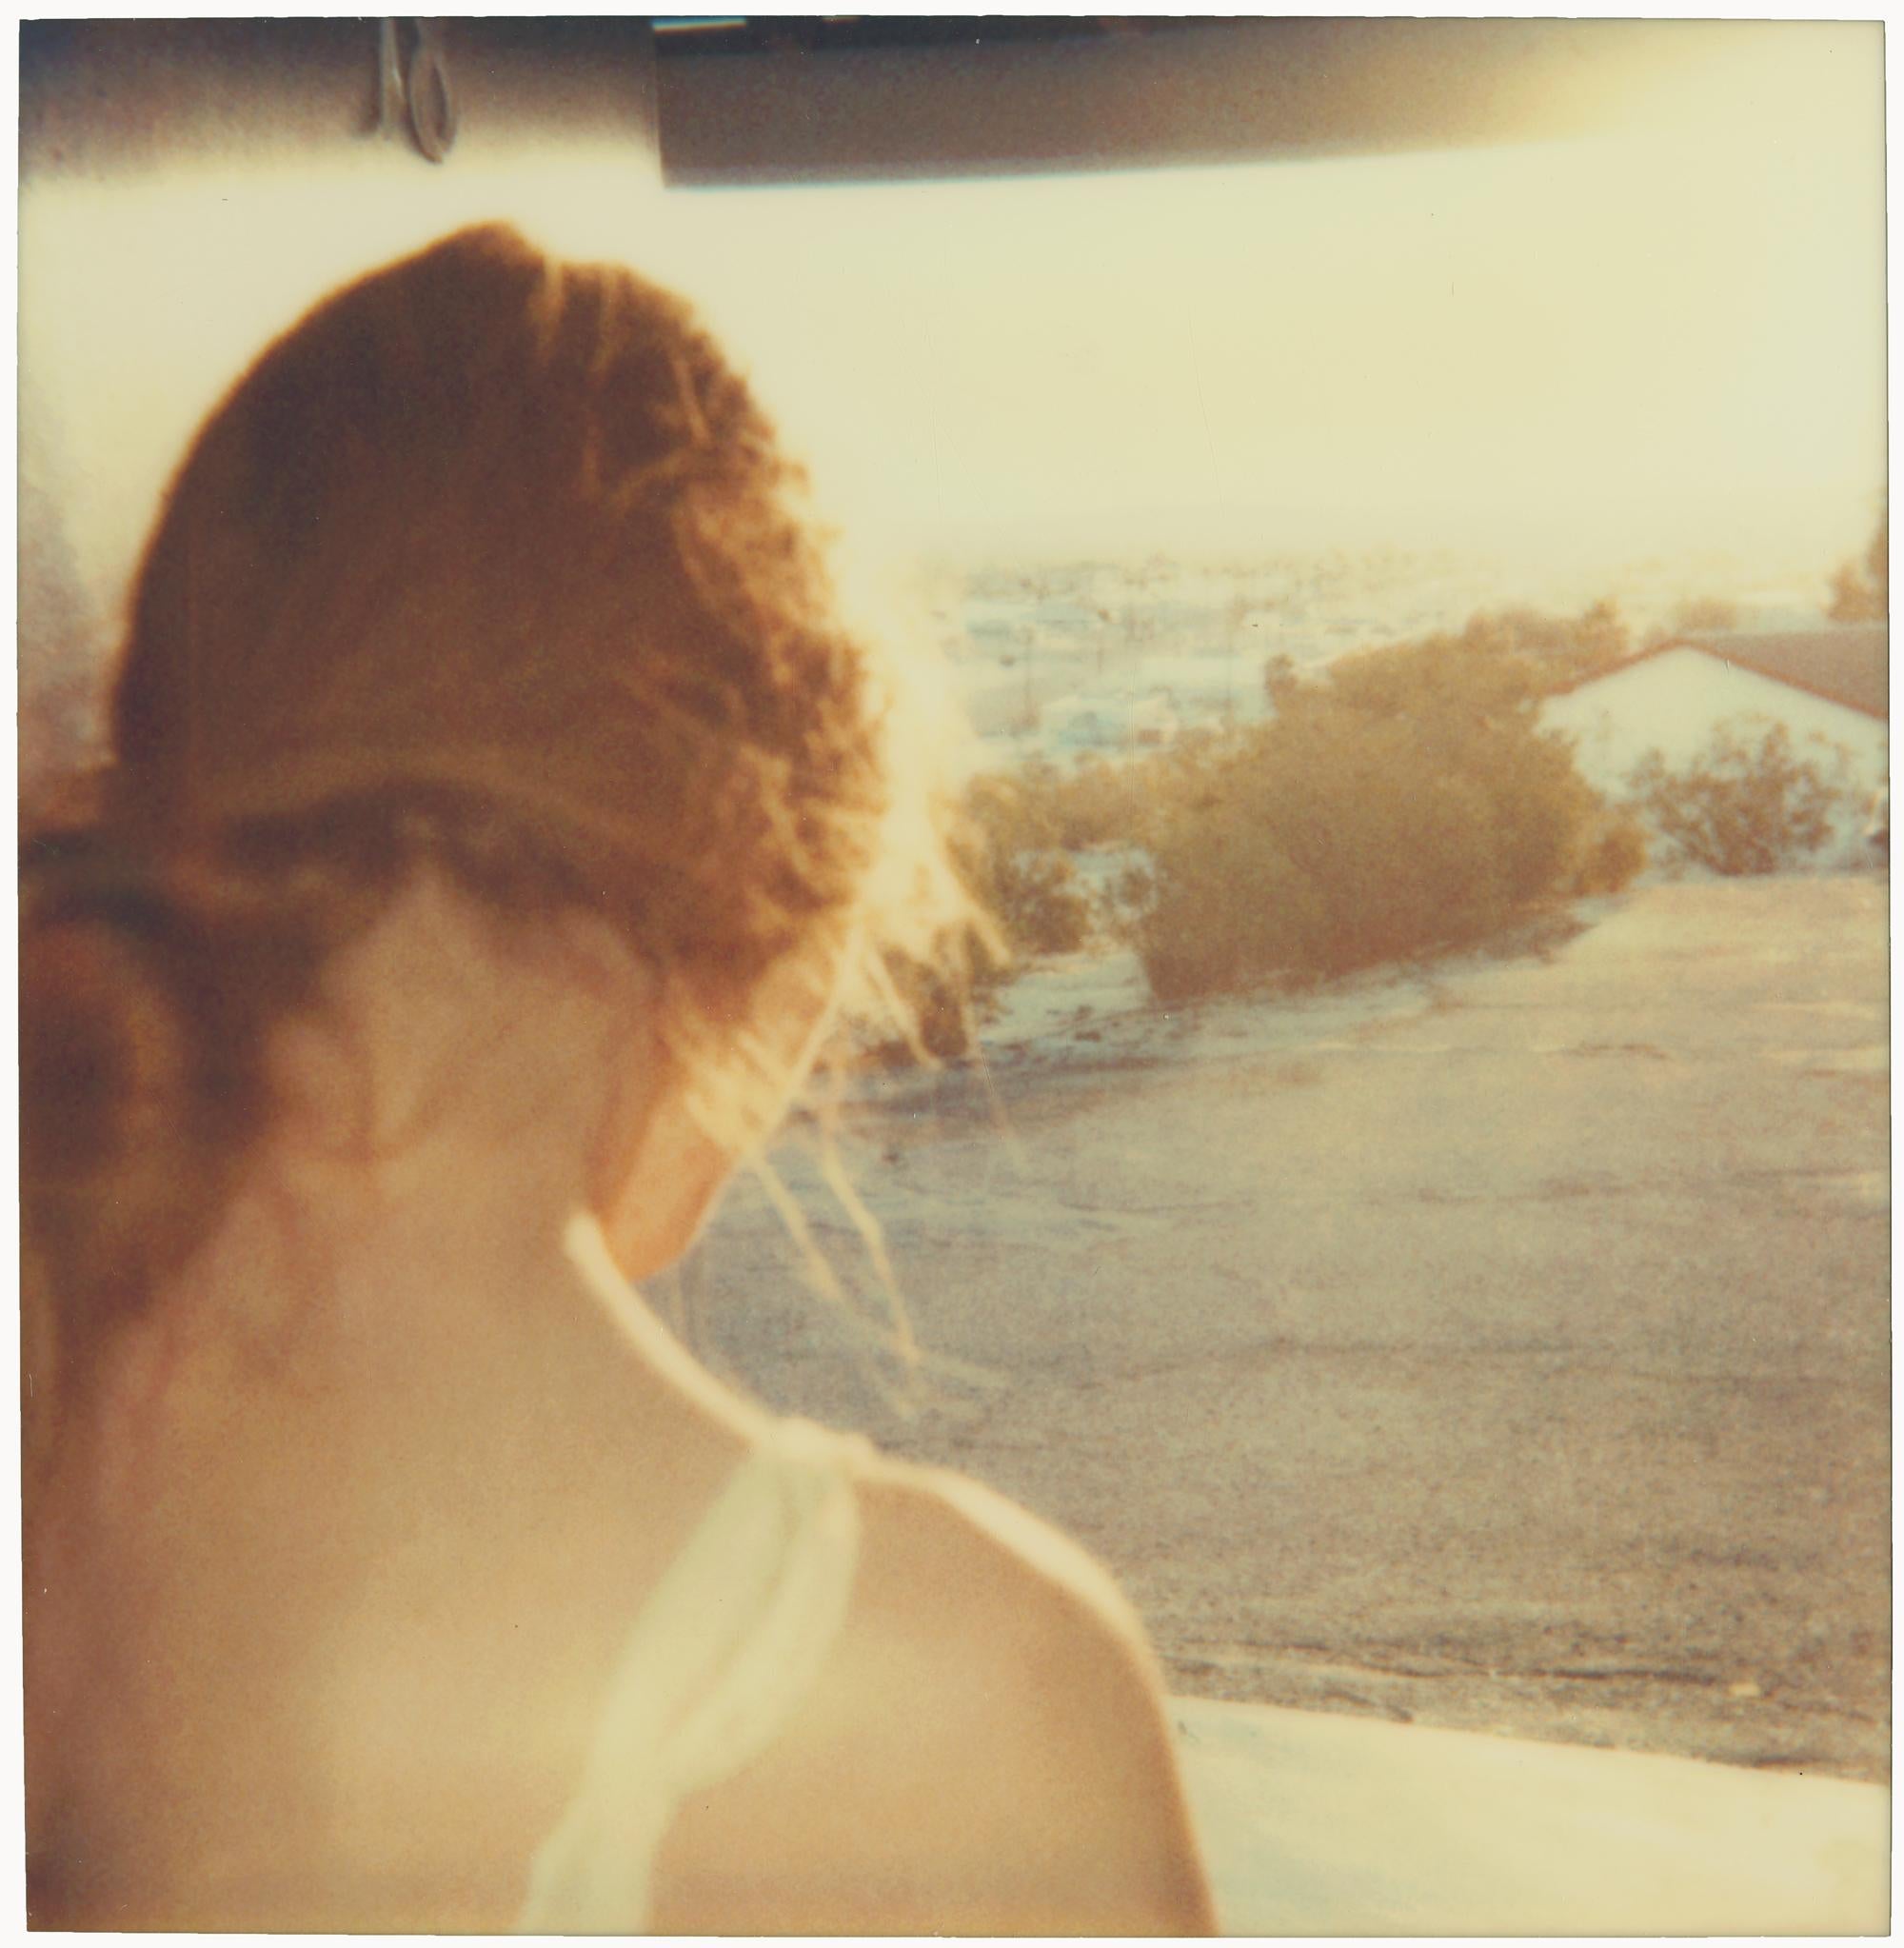 Hillview Motel (Last Picture Show) - analog, vintage, mounted, Polaroid - Contemporary Photograph by Stefanie Schneider